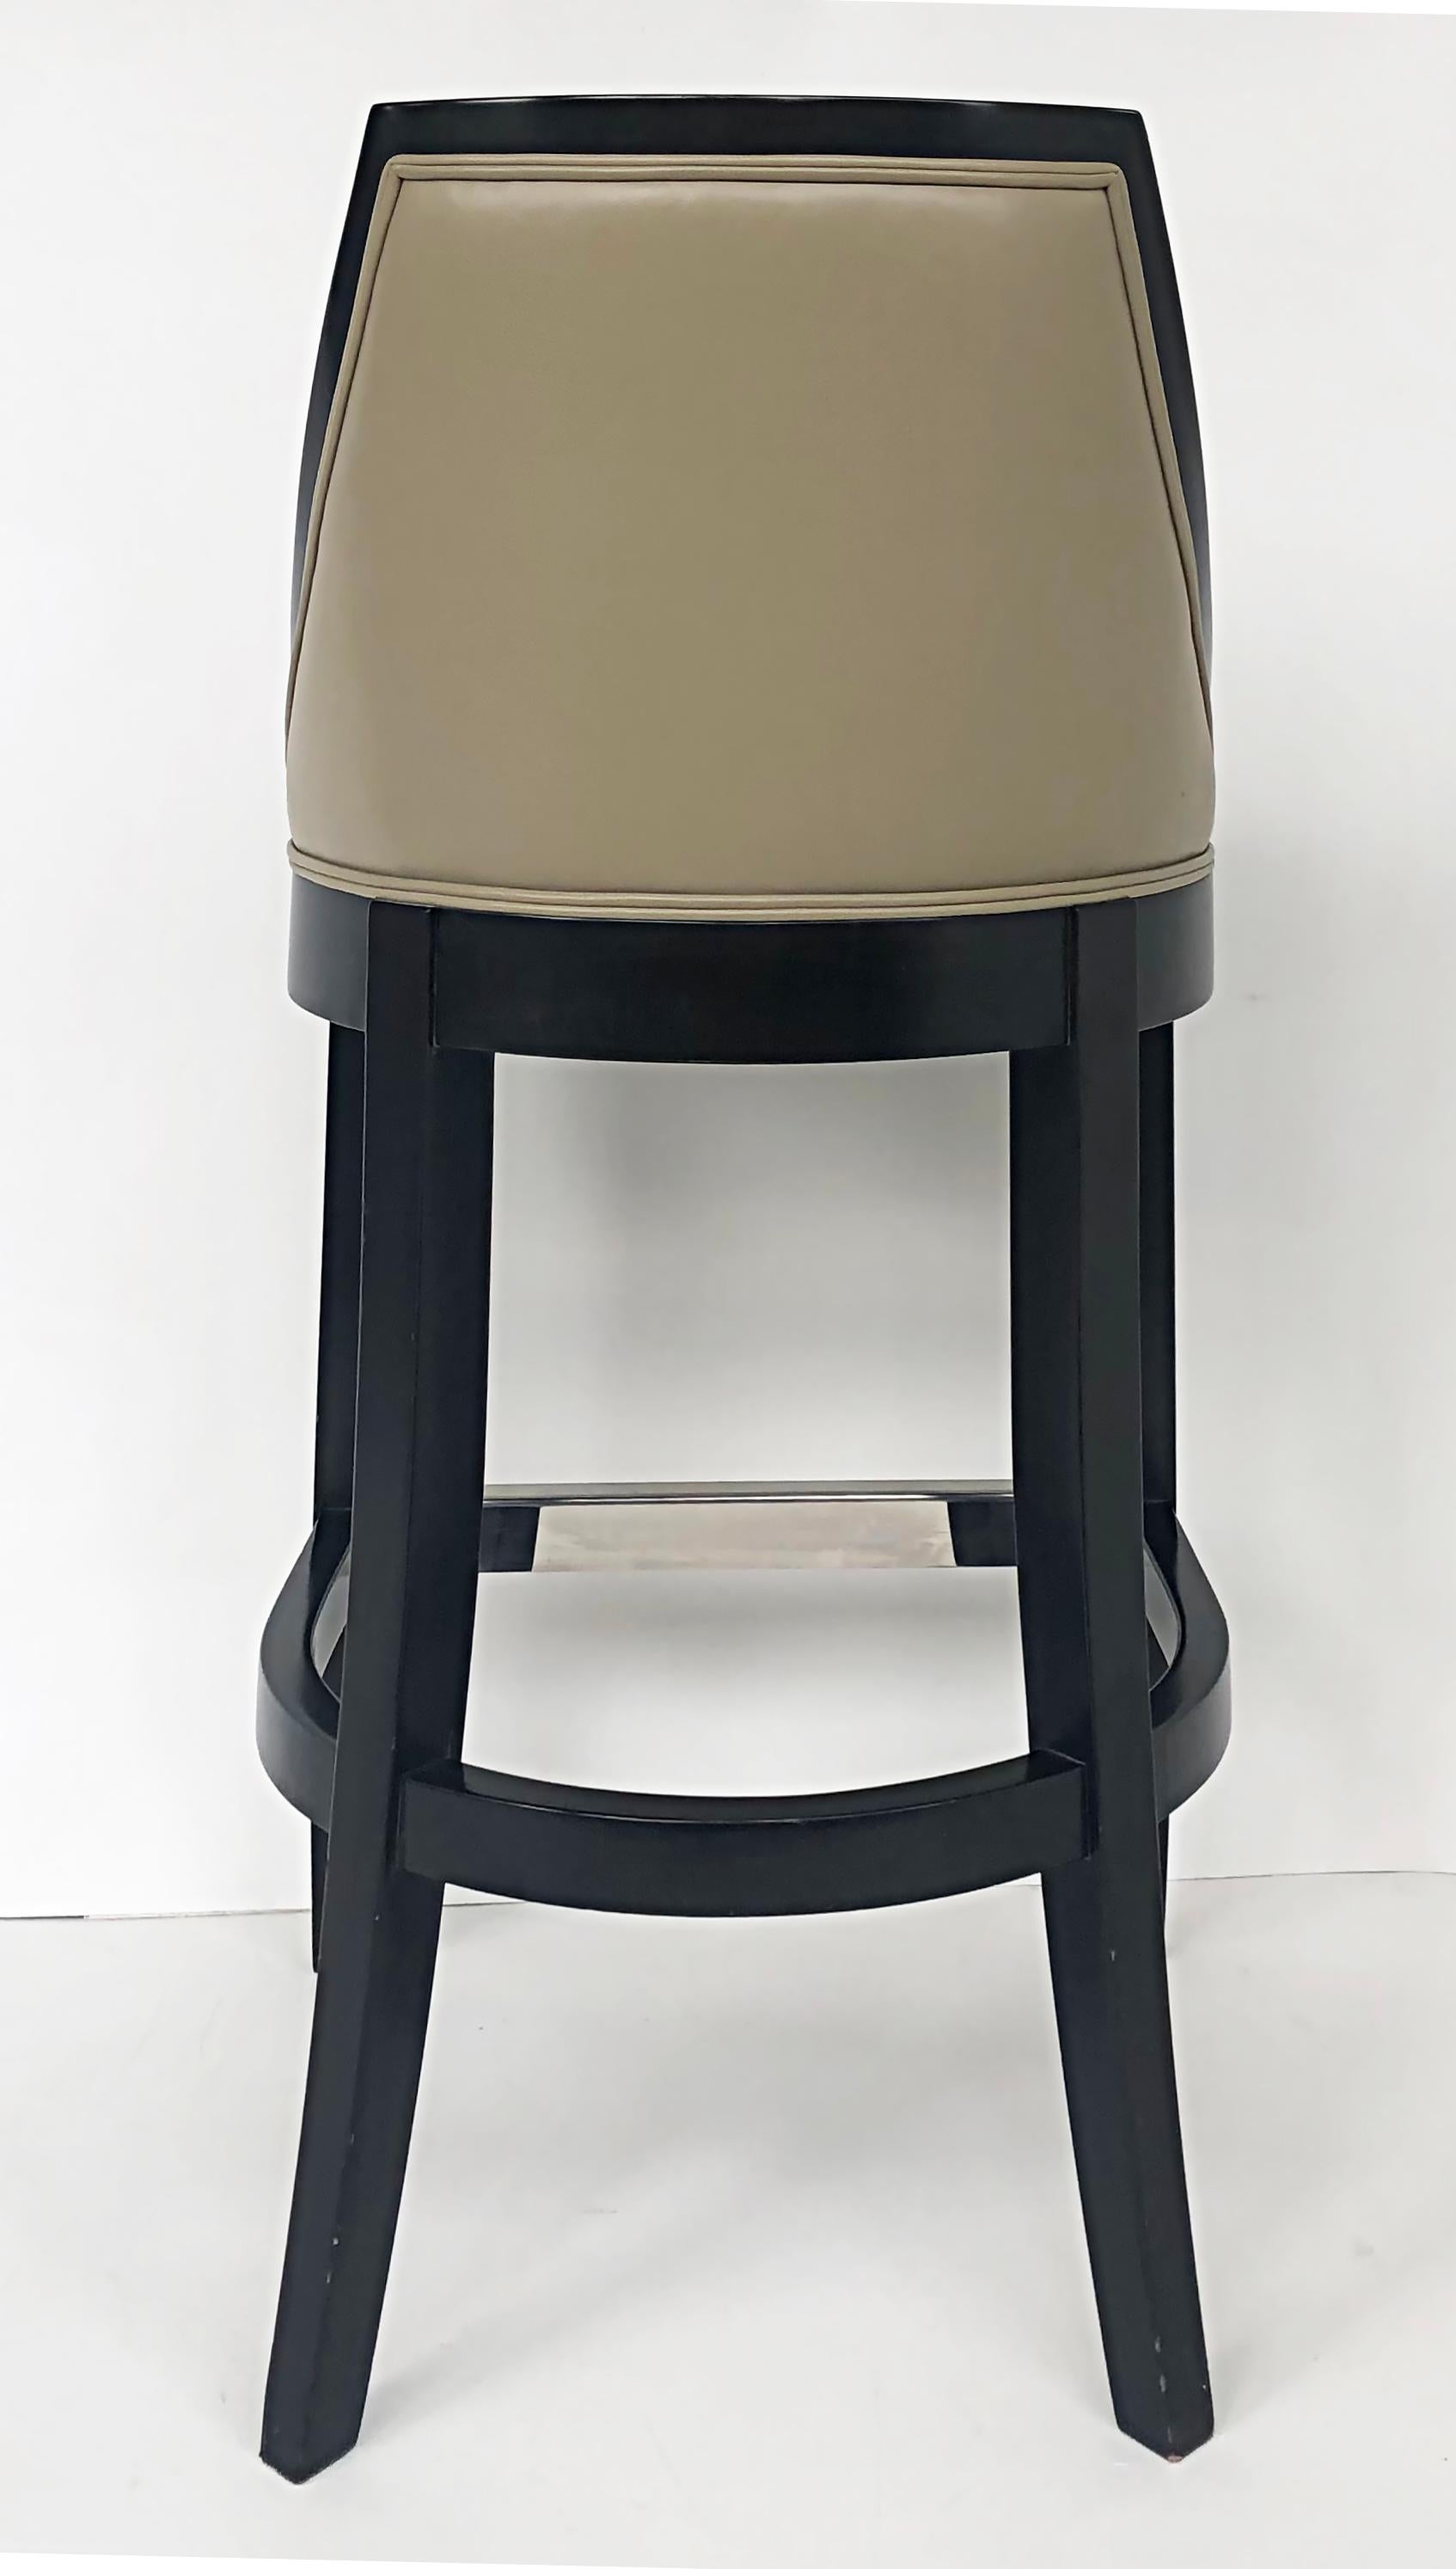 Wood J. Robert Scott Roma Bar Stools in Black Lacquered and Goose Down, Pair